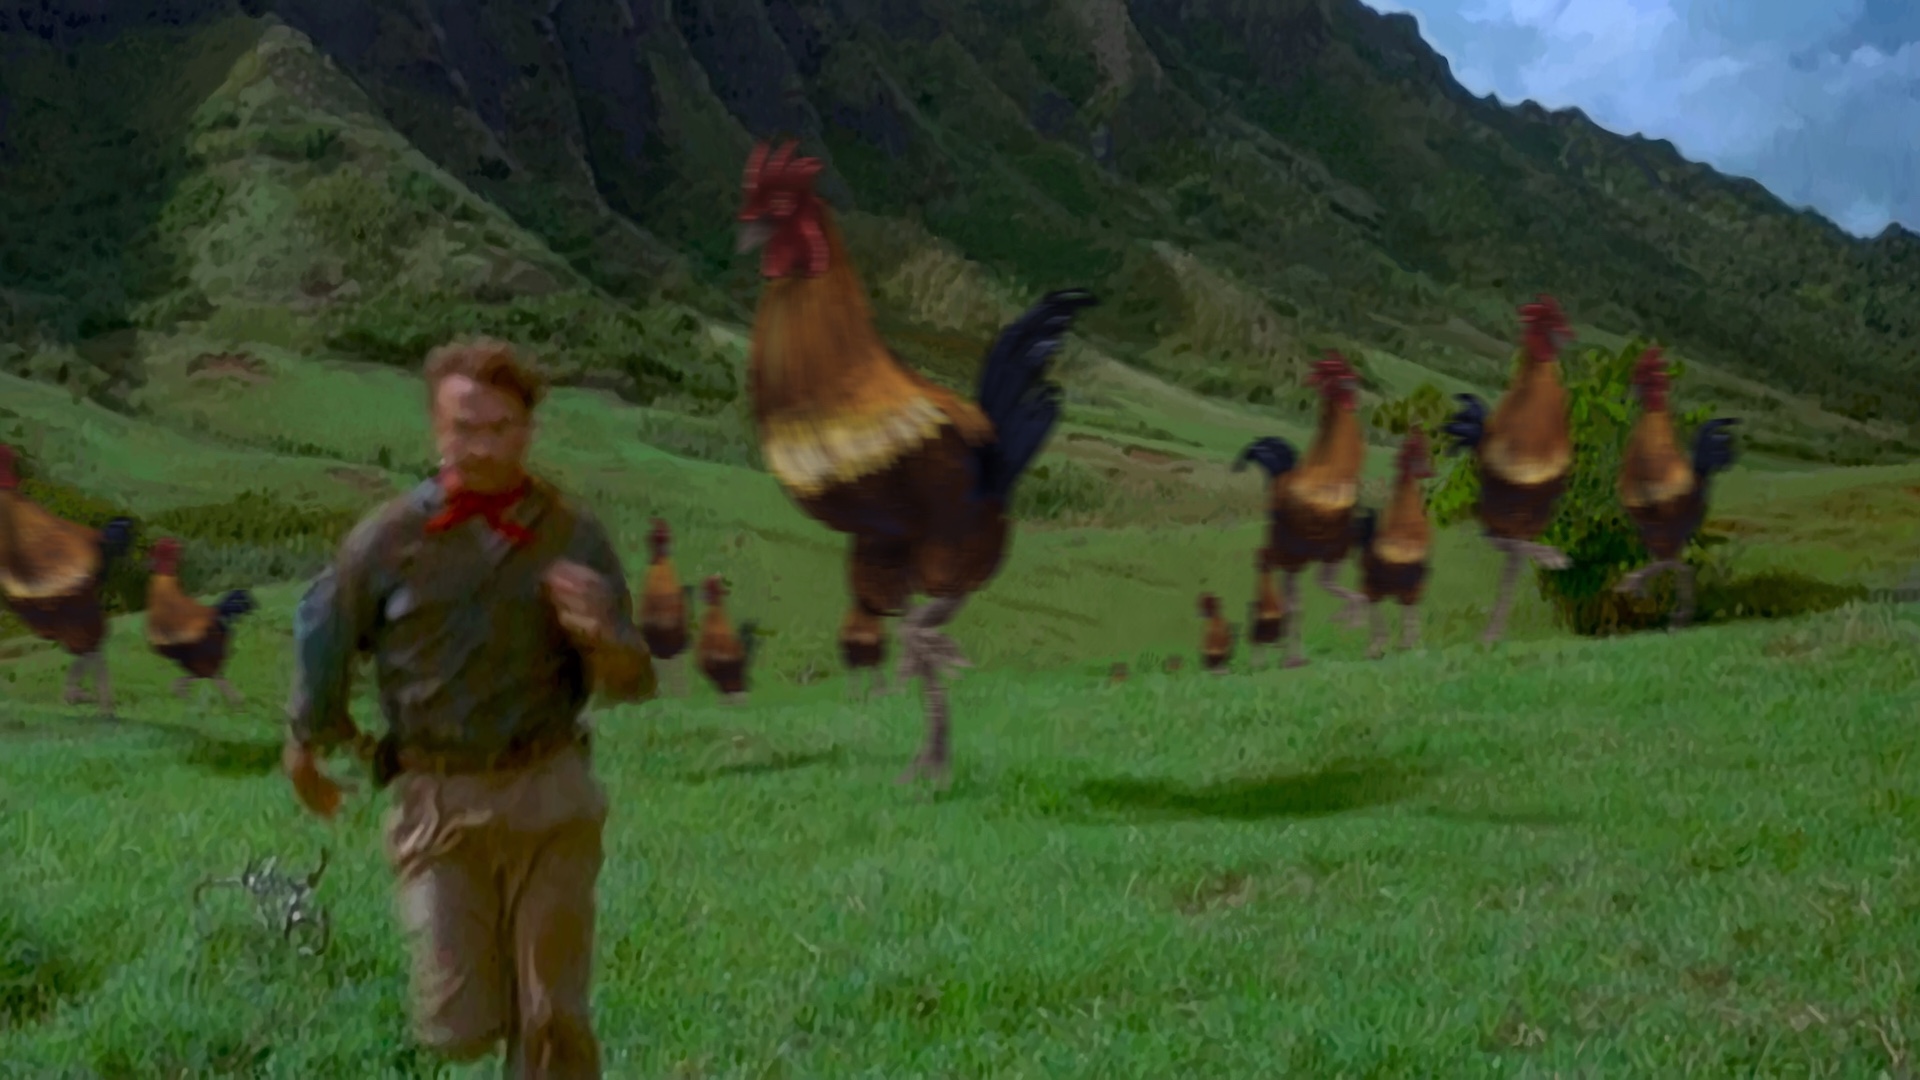 Digitally painted reproduction of of a frame from Jurassic Park, but with a flock of rampaging roosters instead of gallimimus.